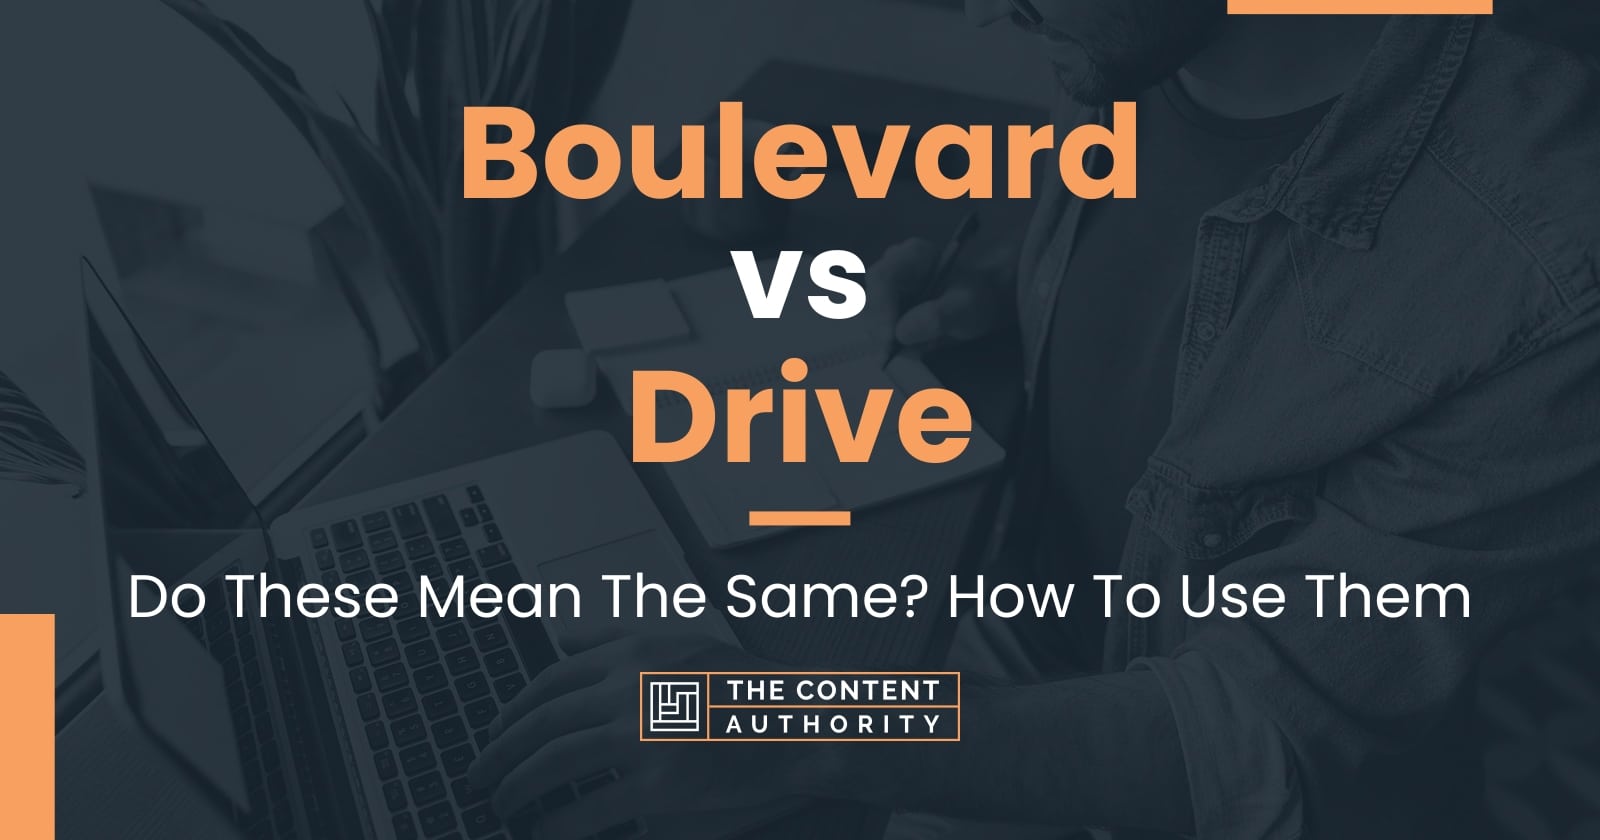 Boulevard vs Drive: Do These Mean The Same? How To Use Them